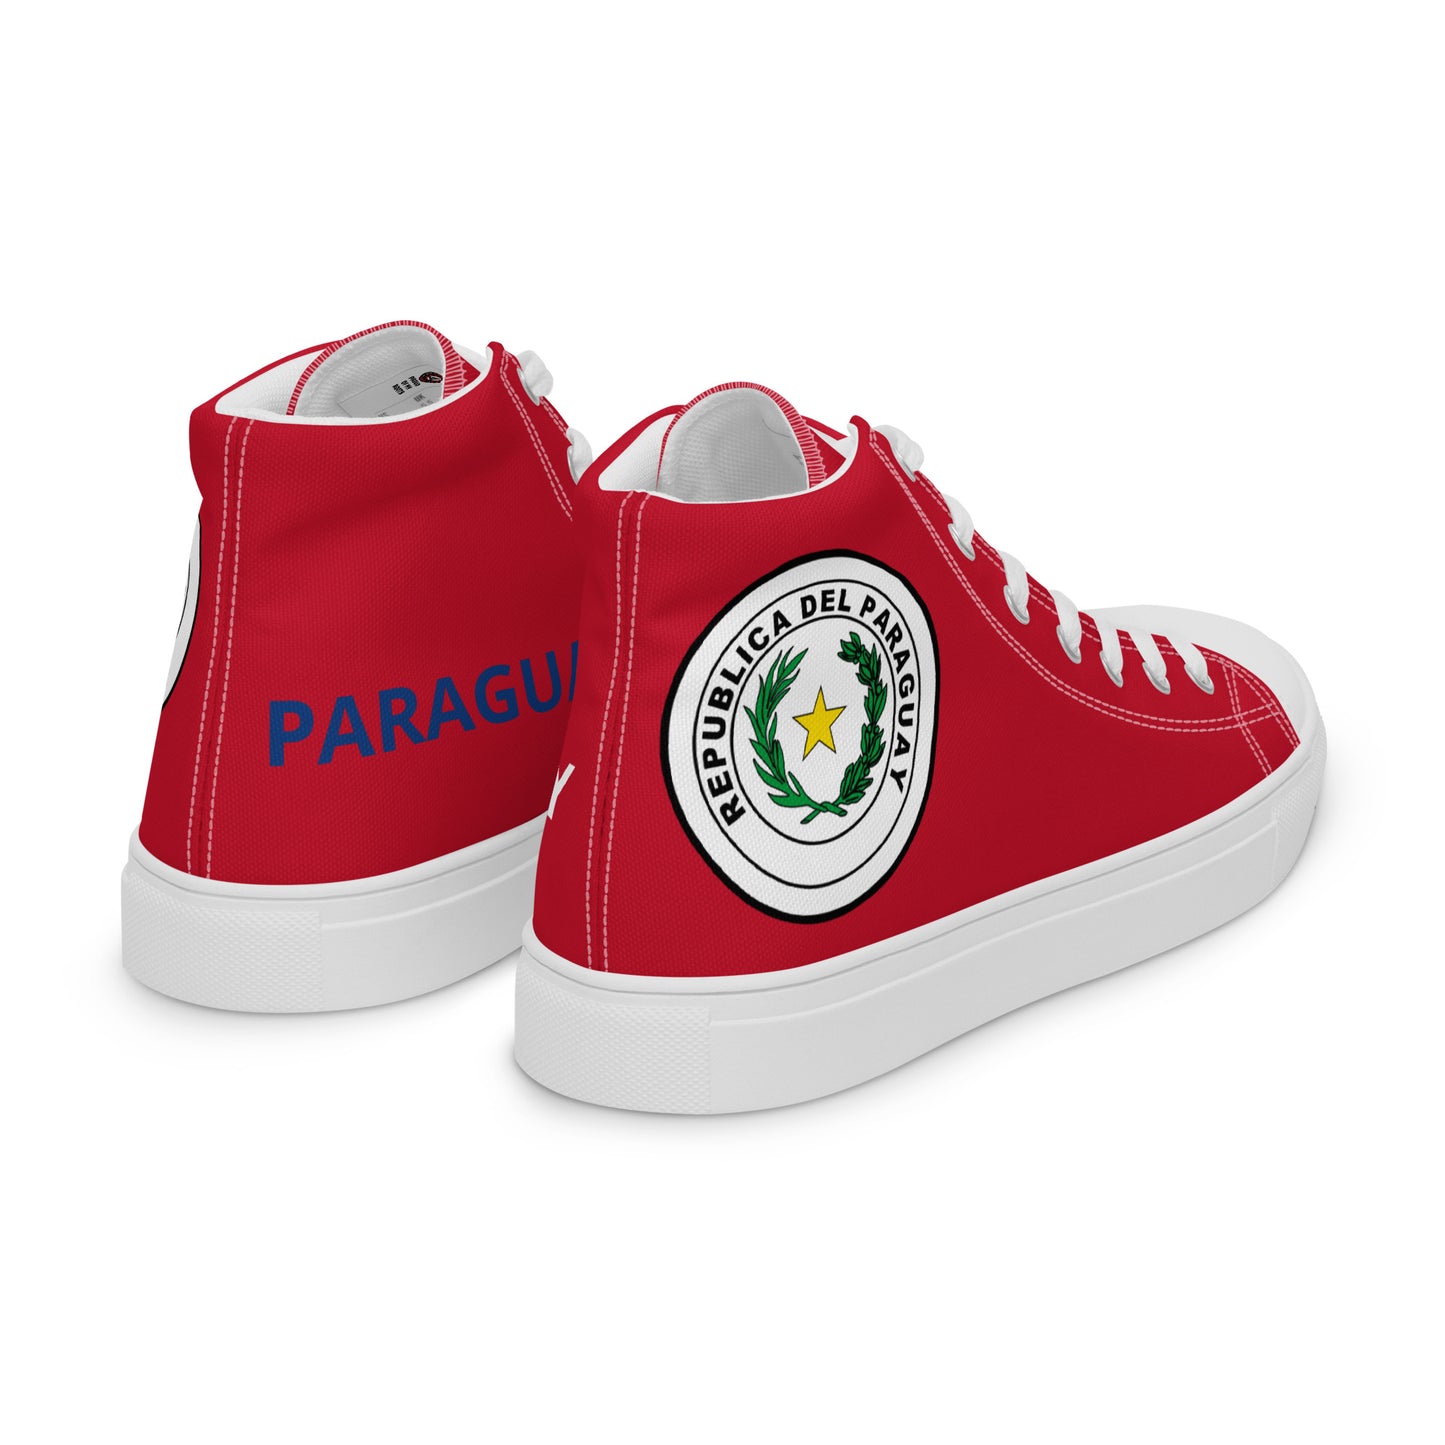 Paraguay - Women - Red - High top shoes